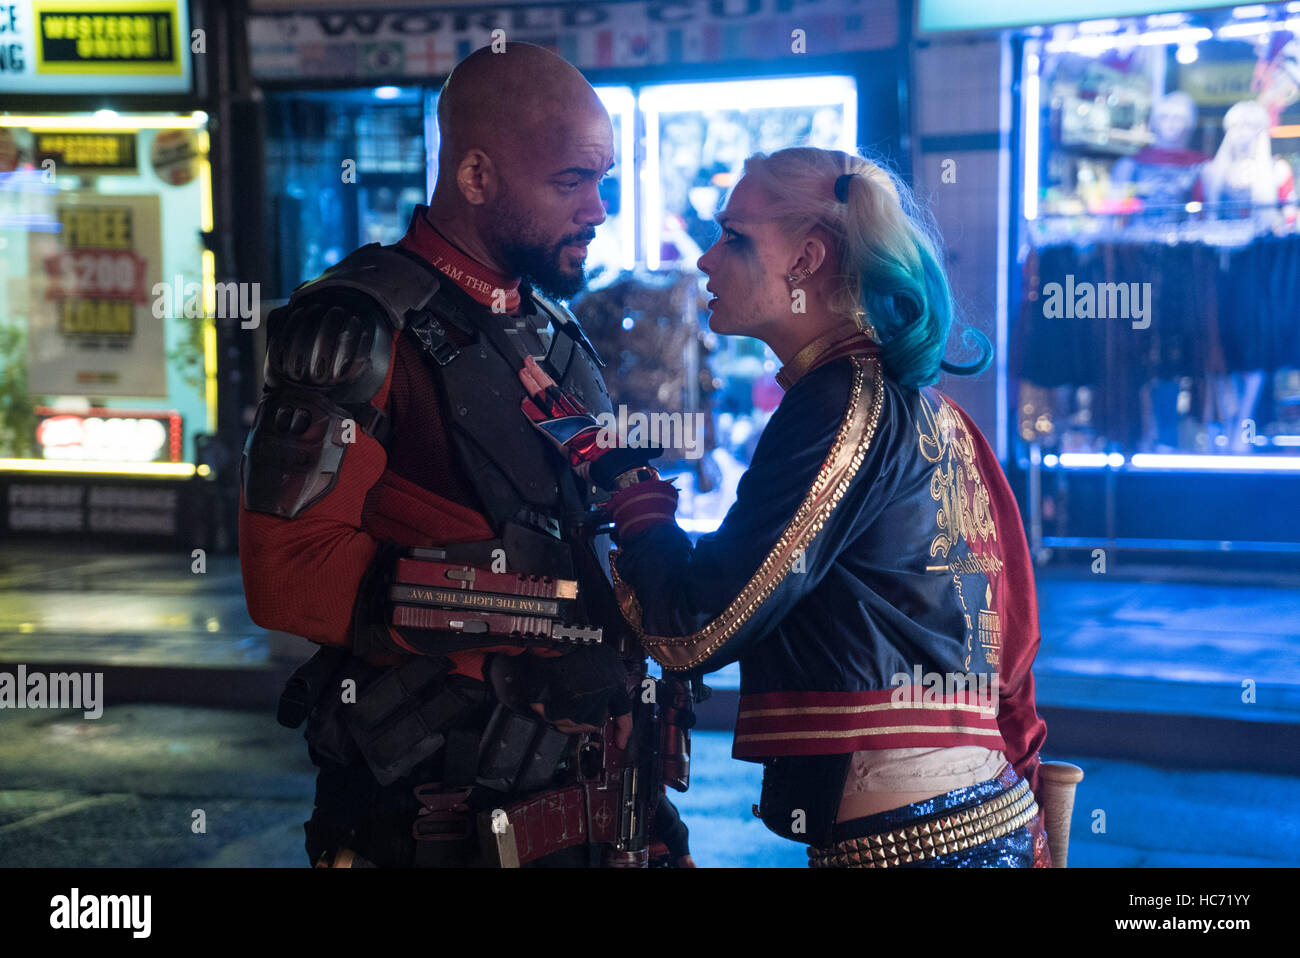 RELEASE DATE: August 5, 2016 TITLE: Suicide Squad STUDIO: Atlas Entertainment DIRECTOR: David Ayer PLOT: A secret government agency recruits imprisoned supervillains to execute dangerous black ops missions in exchange for clemency STARRING: Will Smith as Deadshot, Margot Robbie as Harley Quinn (Credit Image: c Atlas Entertainment/Entertainment Pictures/) Stock Photo